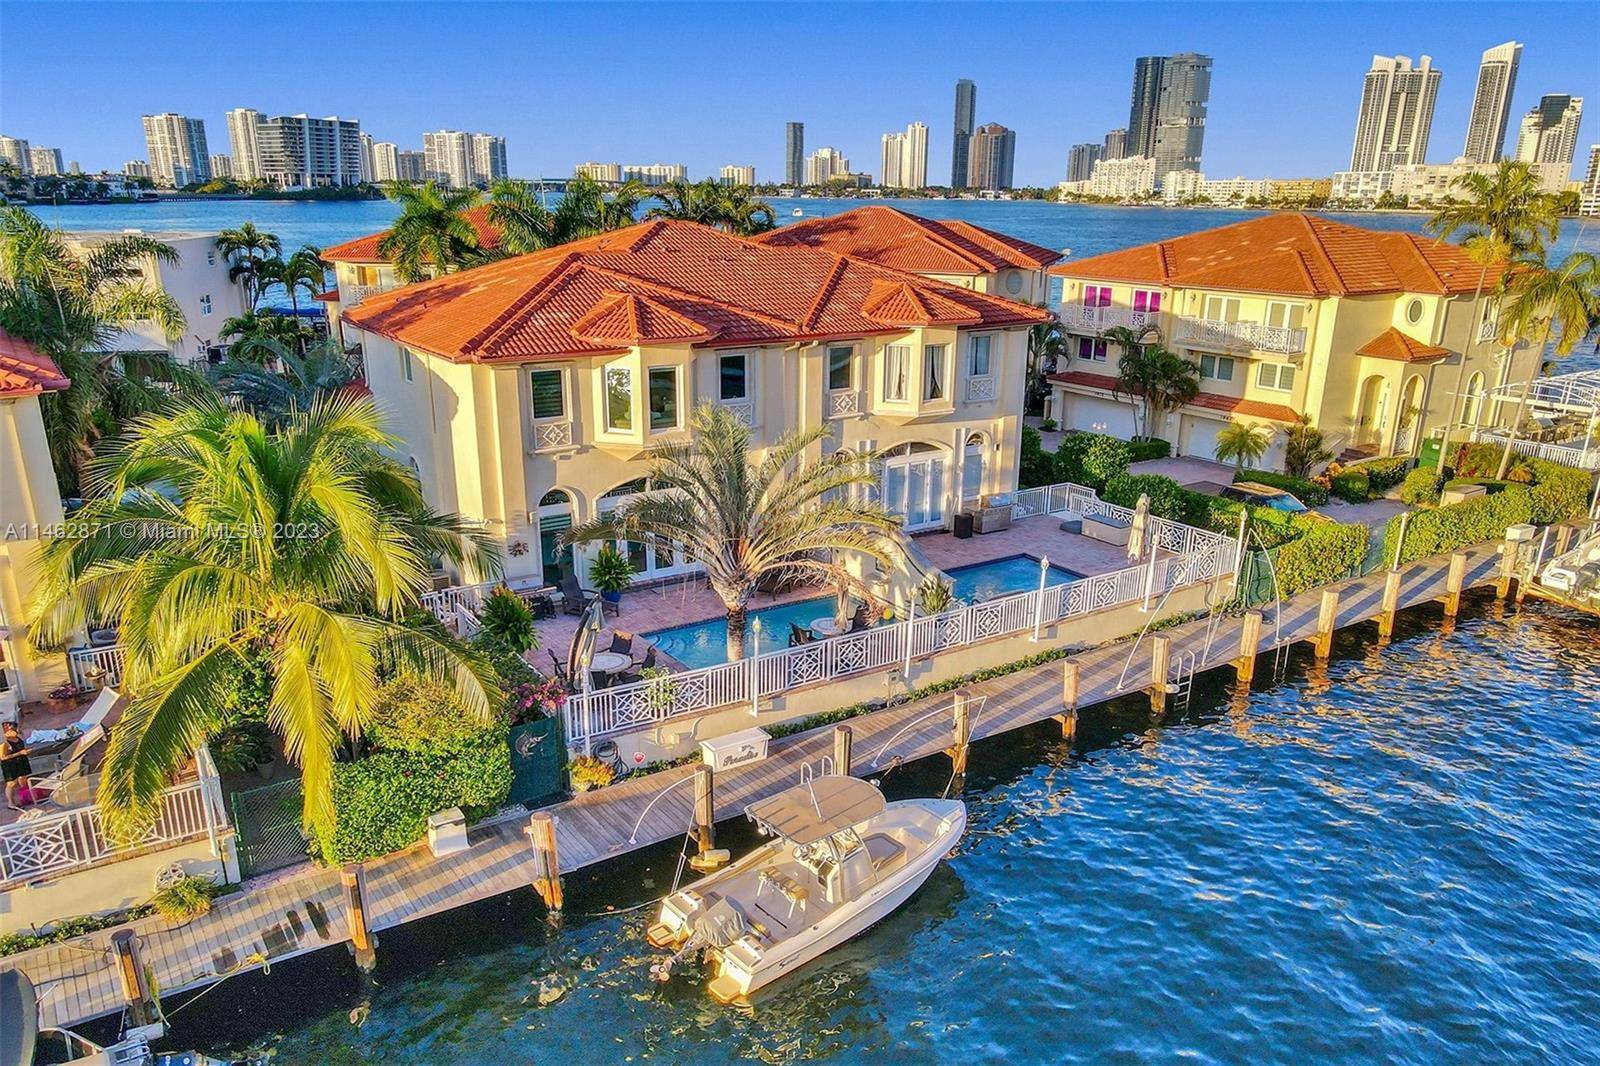 Exceptional opportunity to rent this fully furnished, immaculate waterfront home in the exclusive and rarely available Neptune on the Bay community of Eastern Shores.